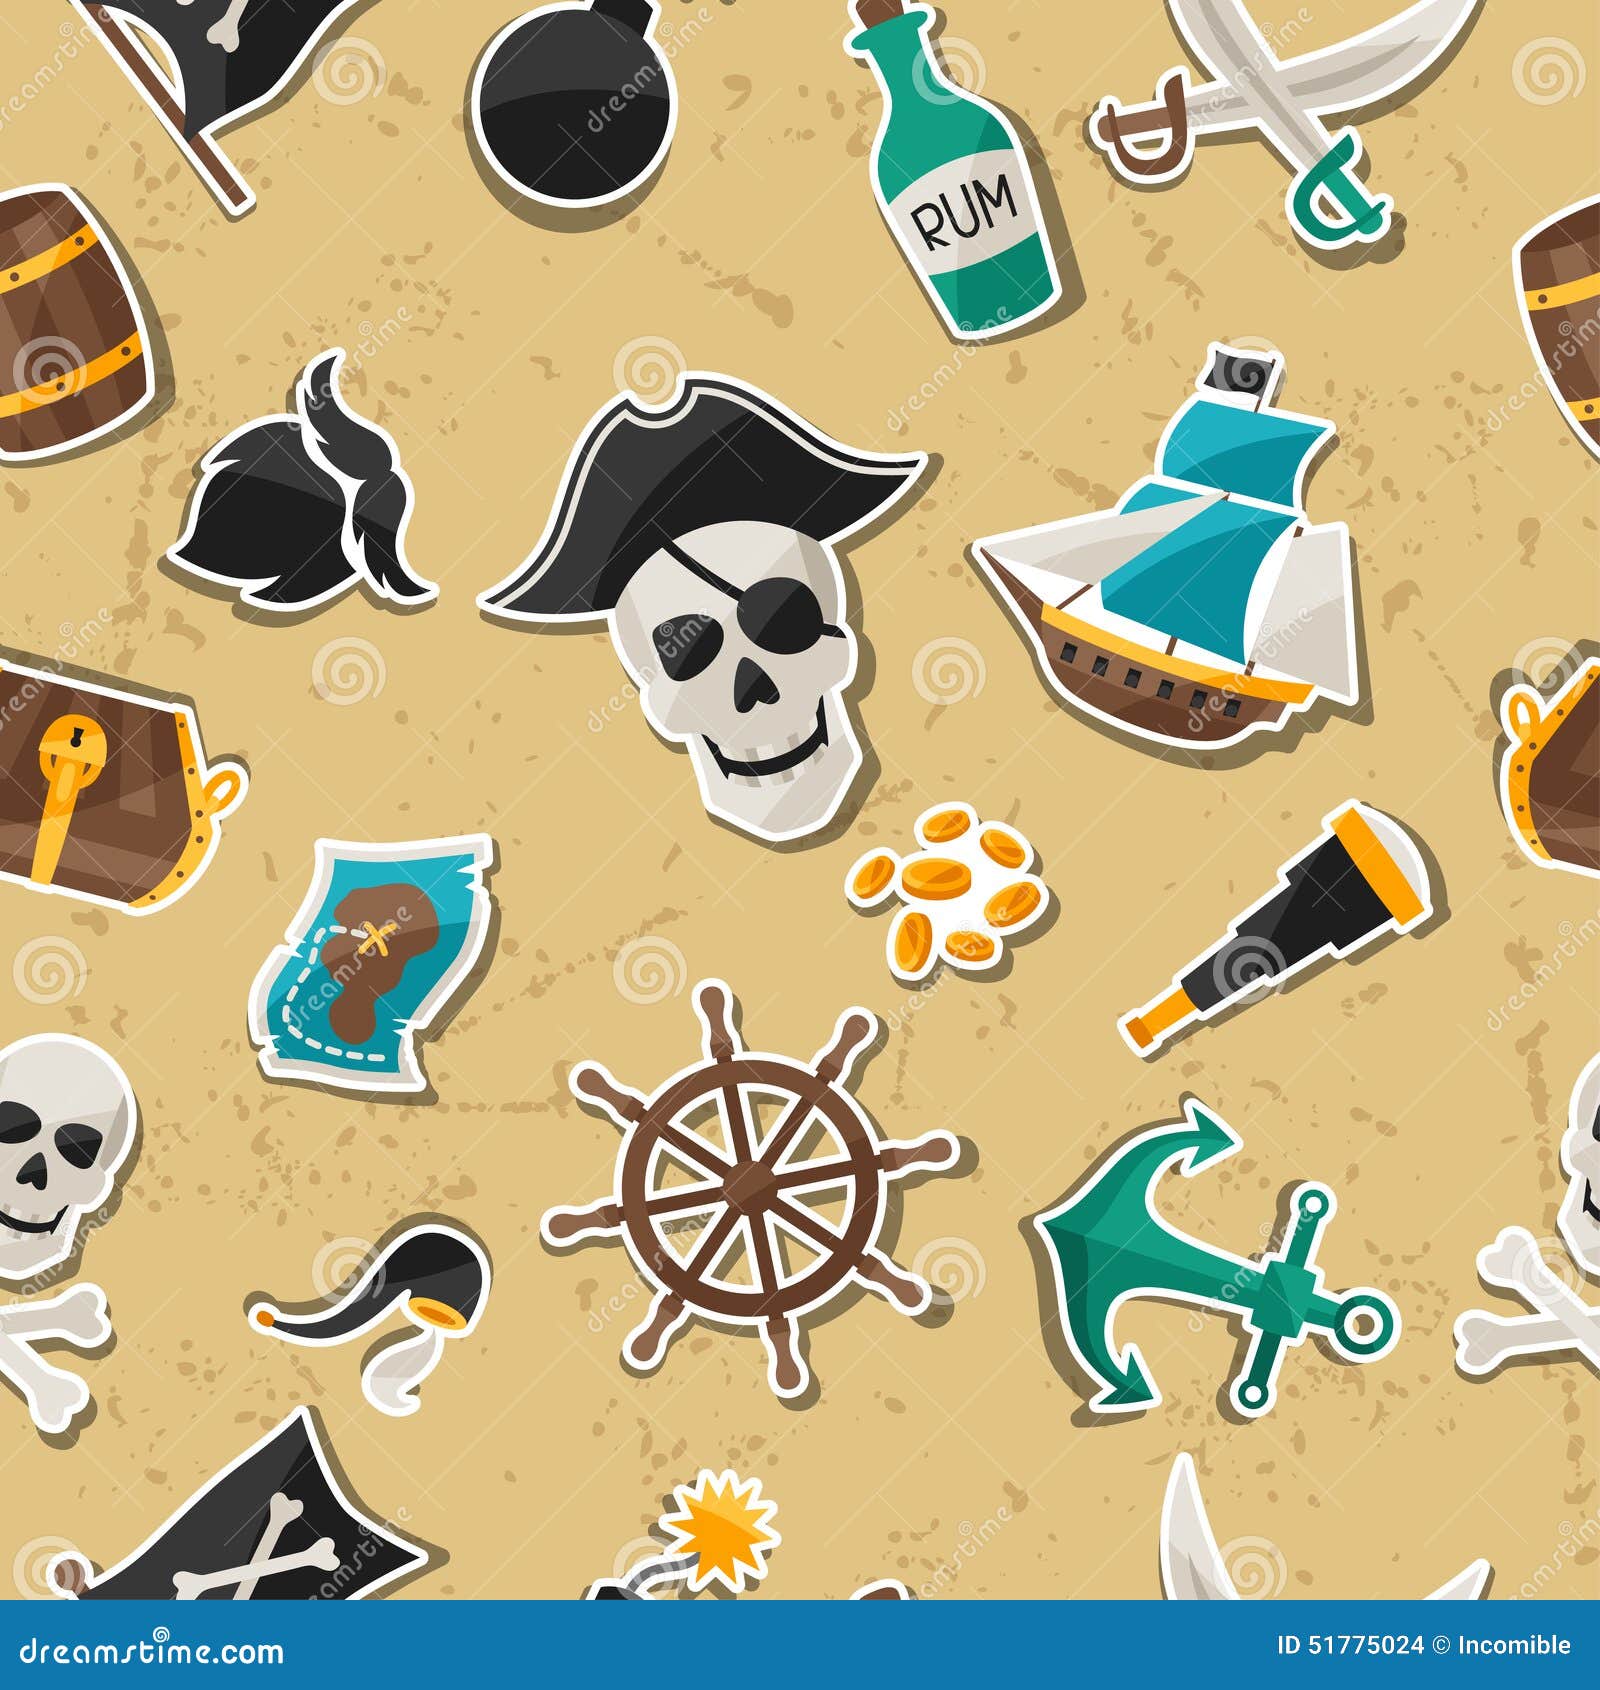 Set of stickers and objects on pirate theme Vector Image